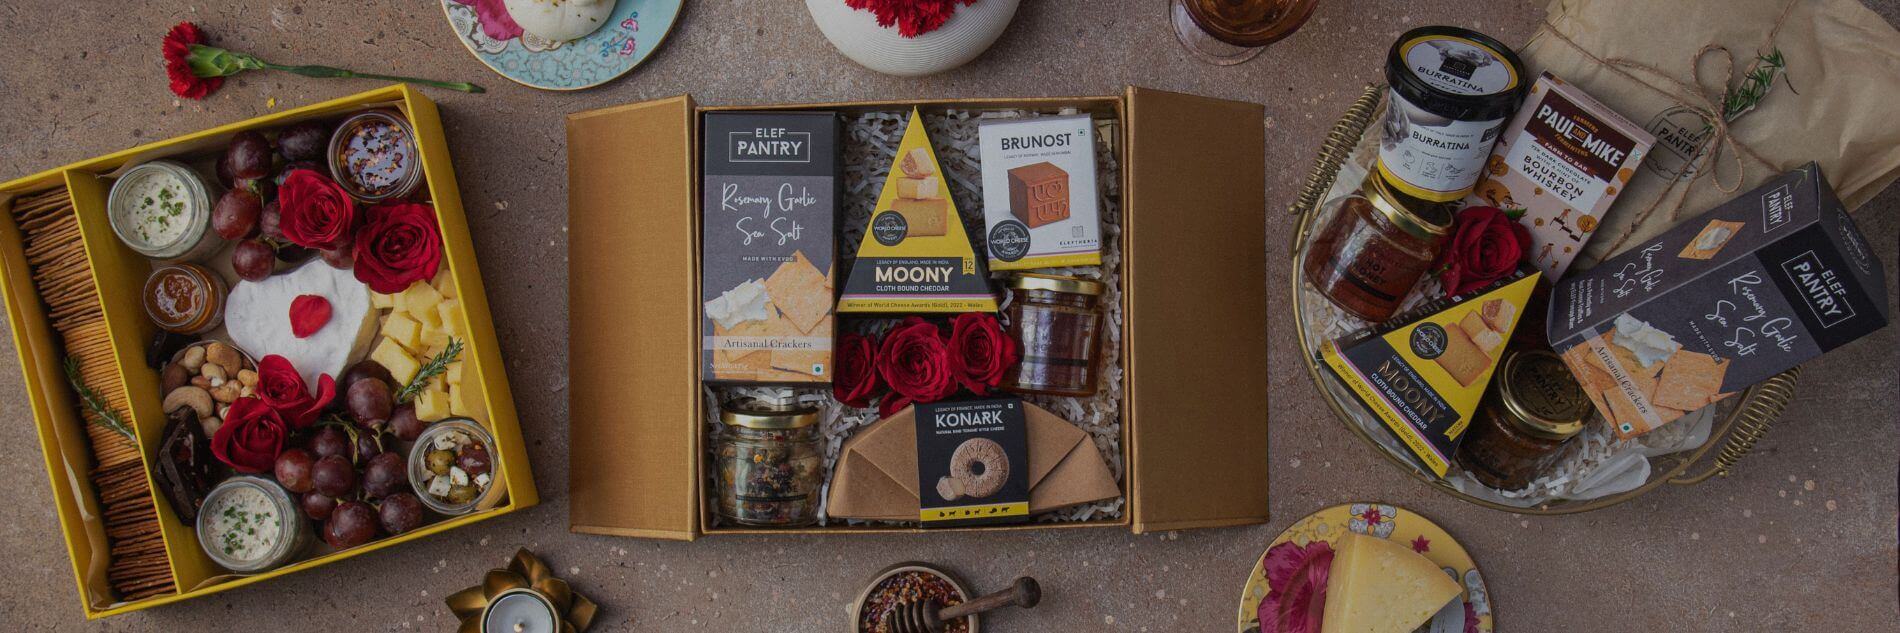 Premium Cheese Gift Box with different varieties of cheeses and its accompaniments.